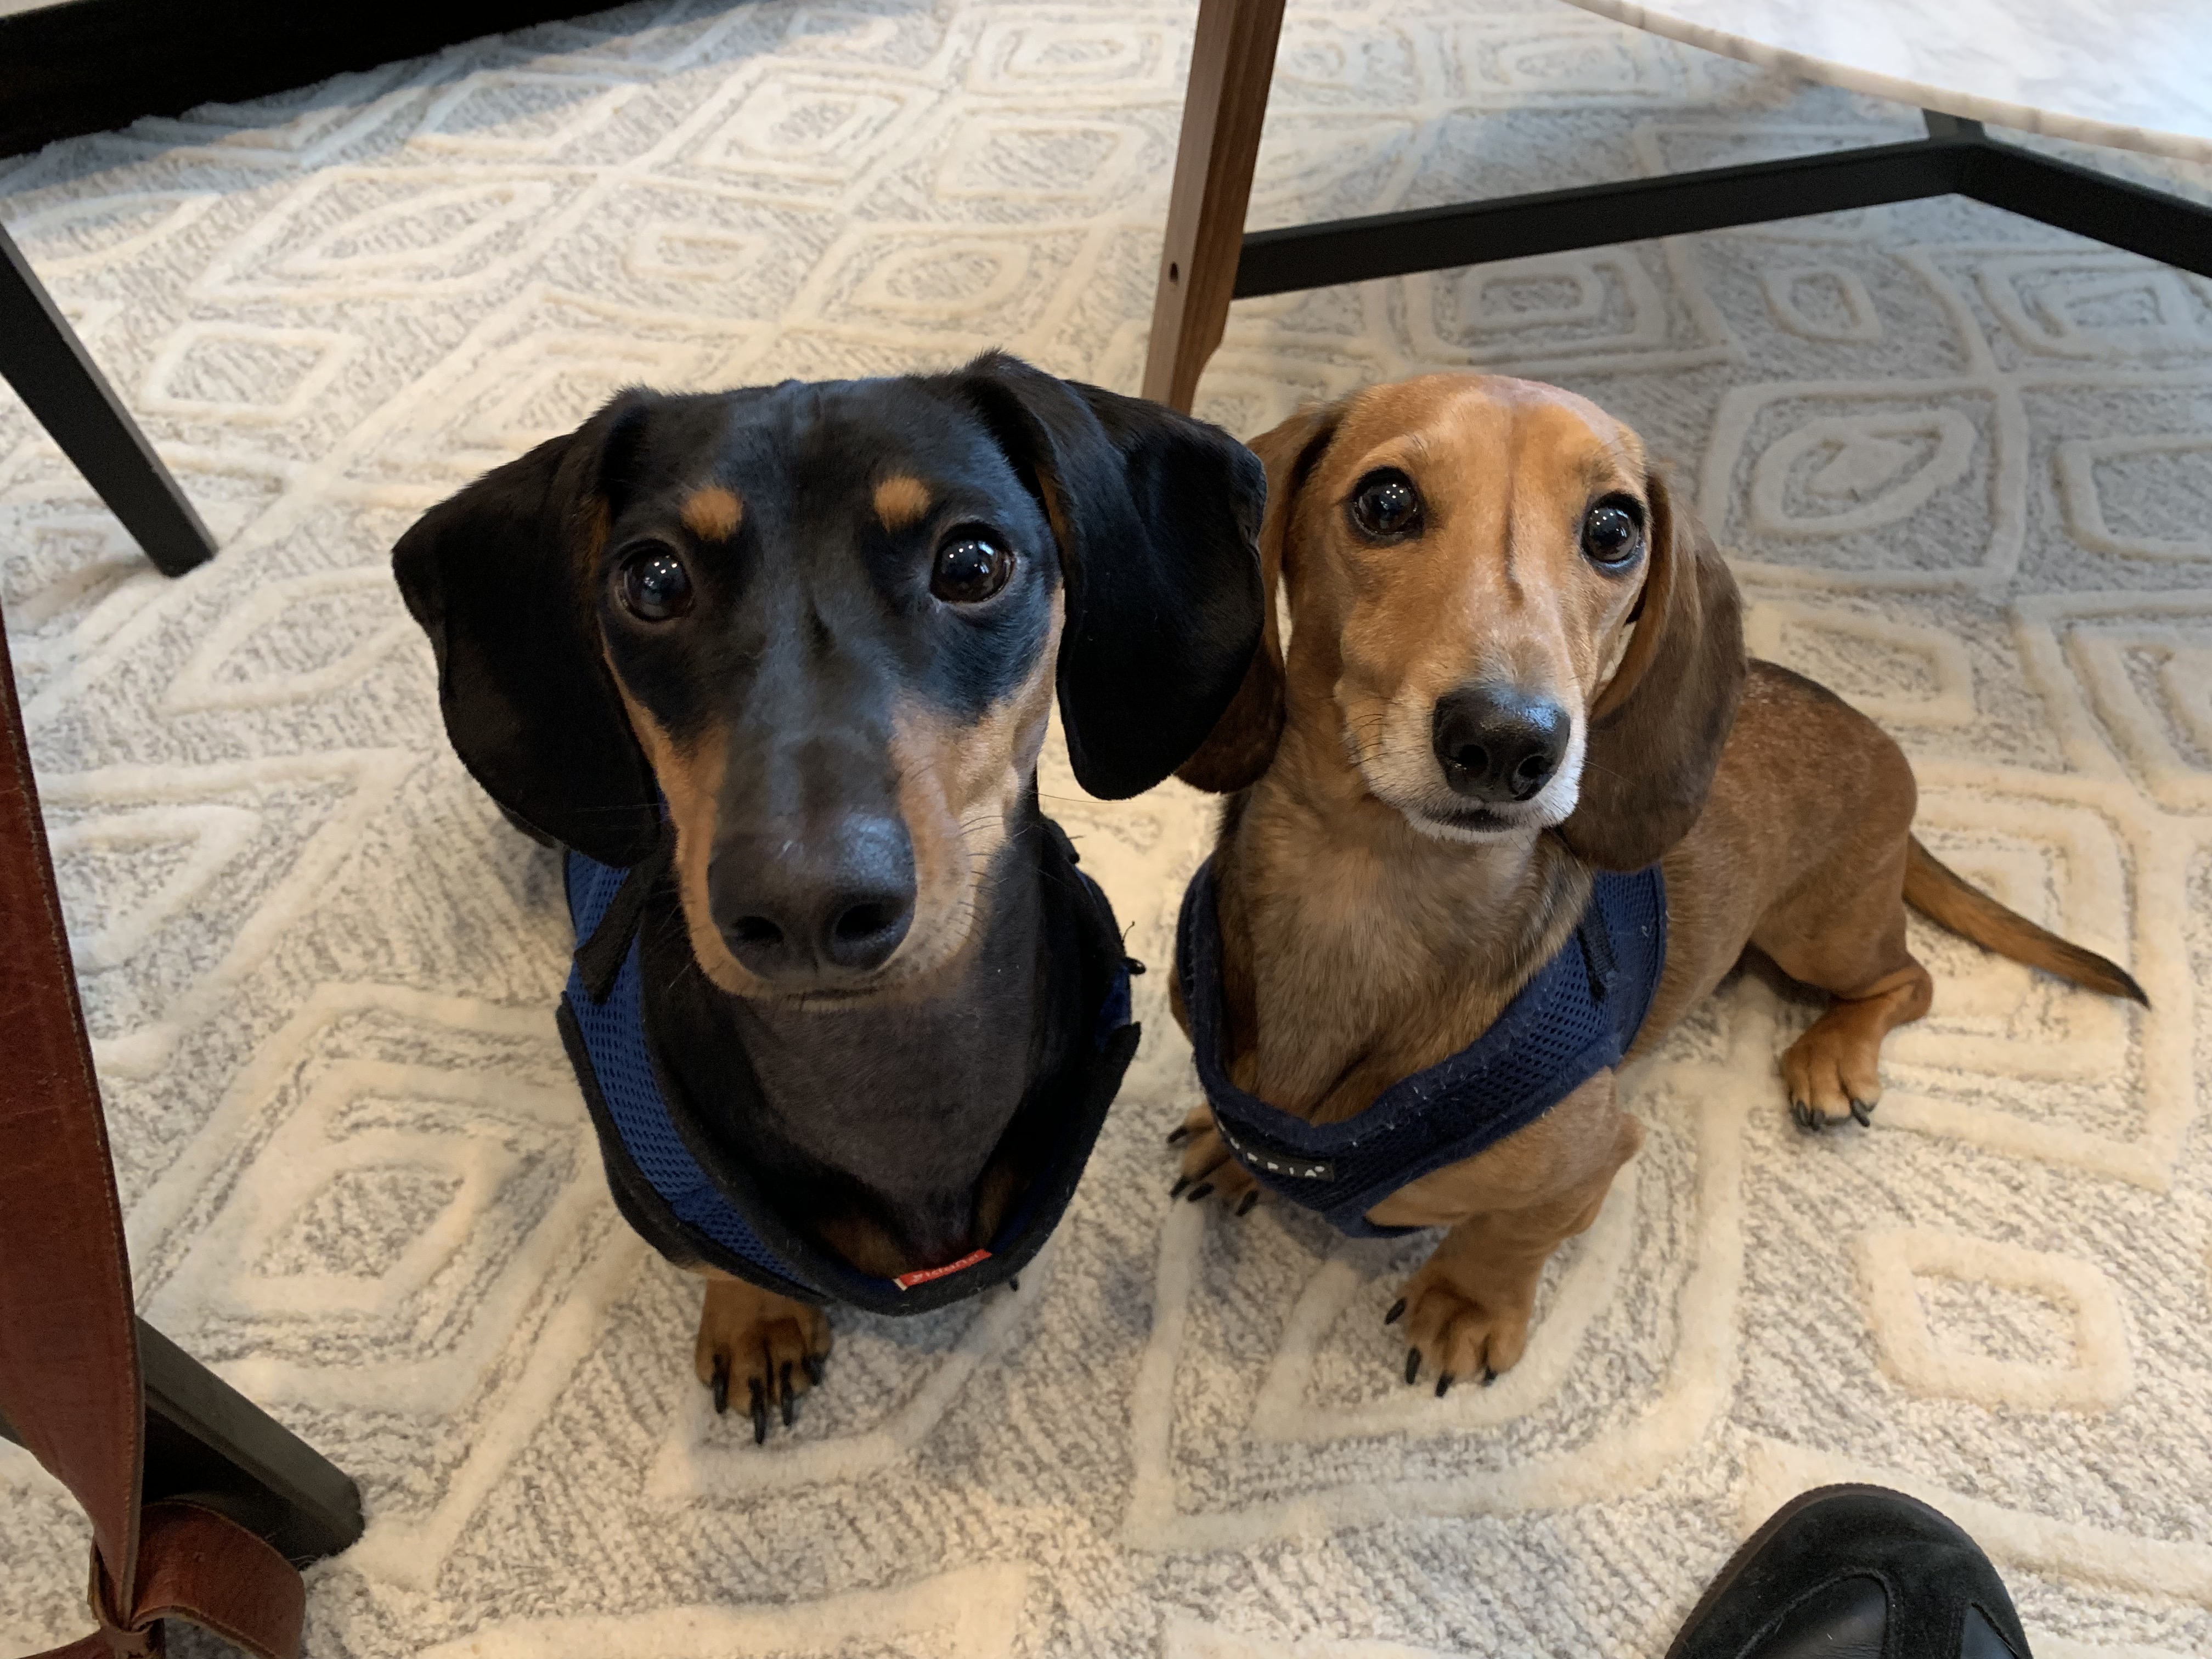 Teaching a Pair of Dachshunds to Focus to Stop Their